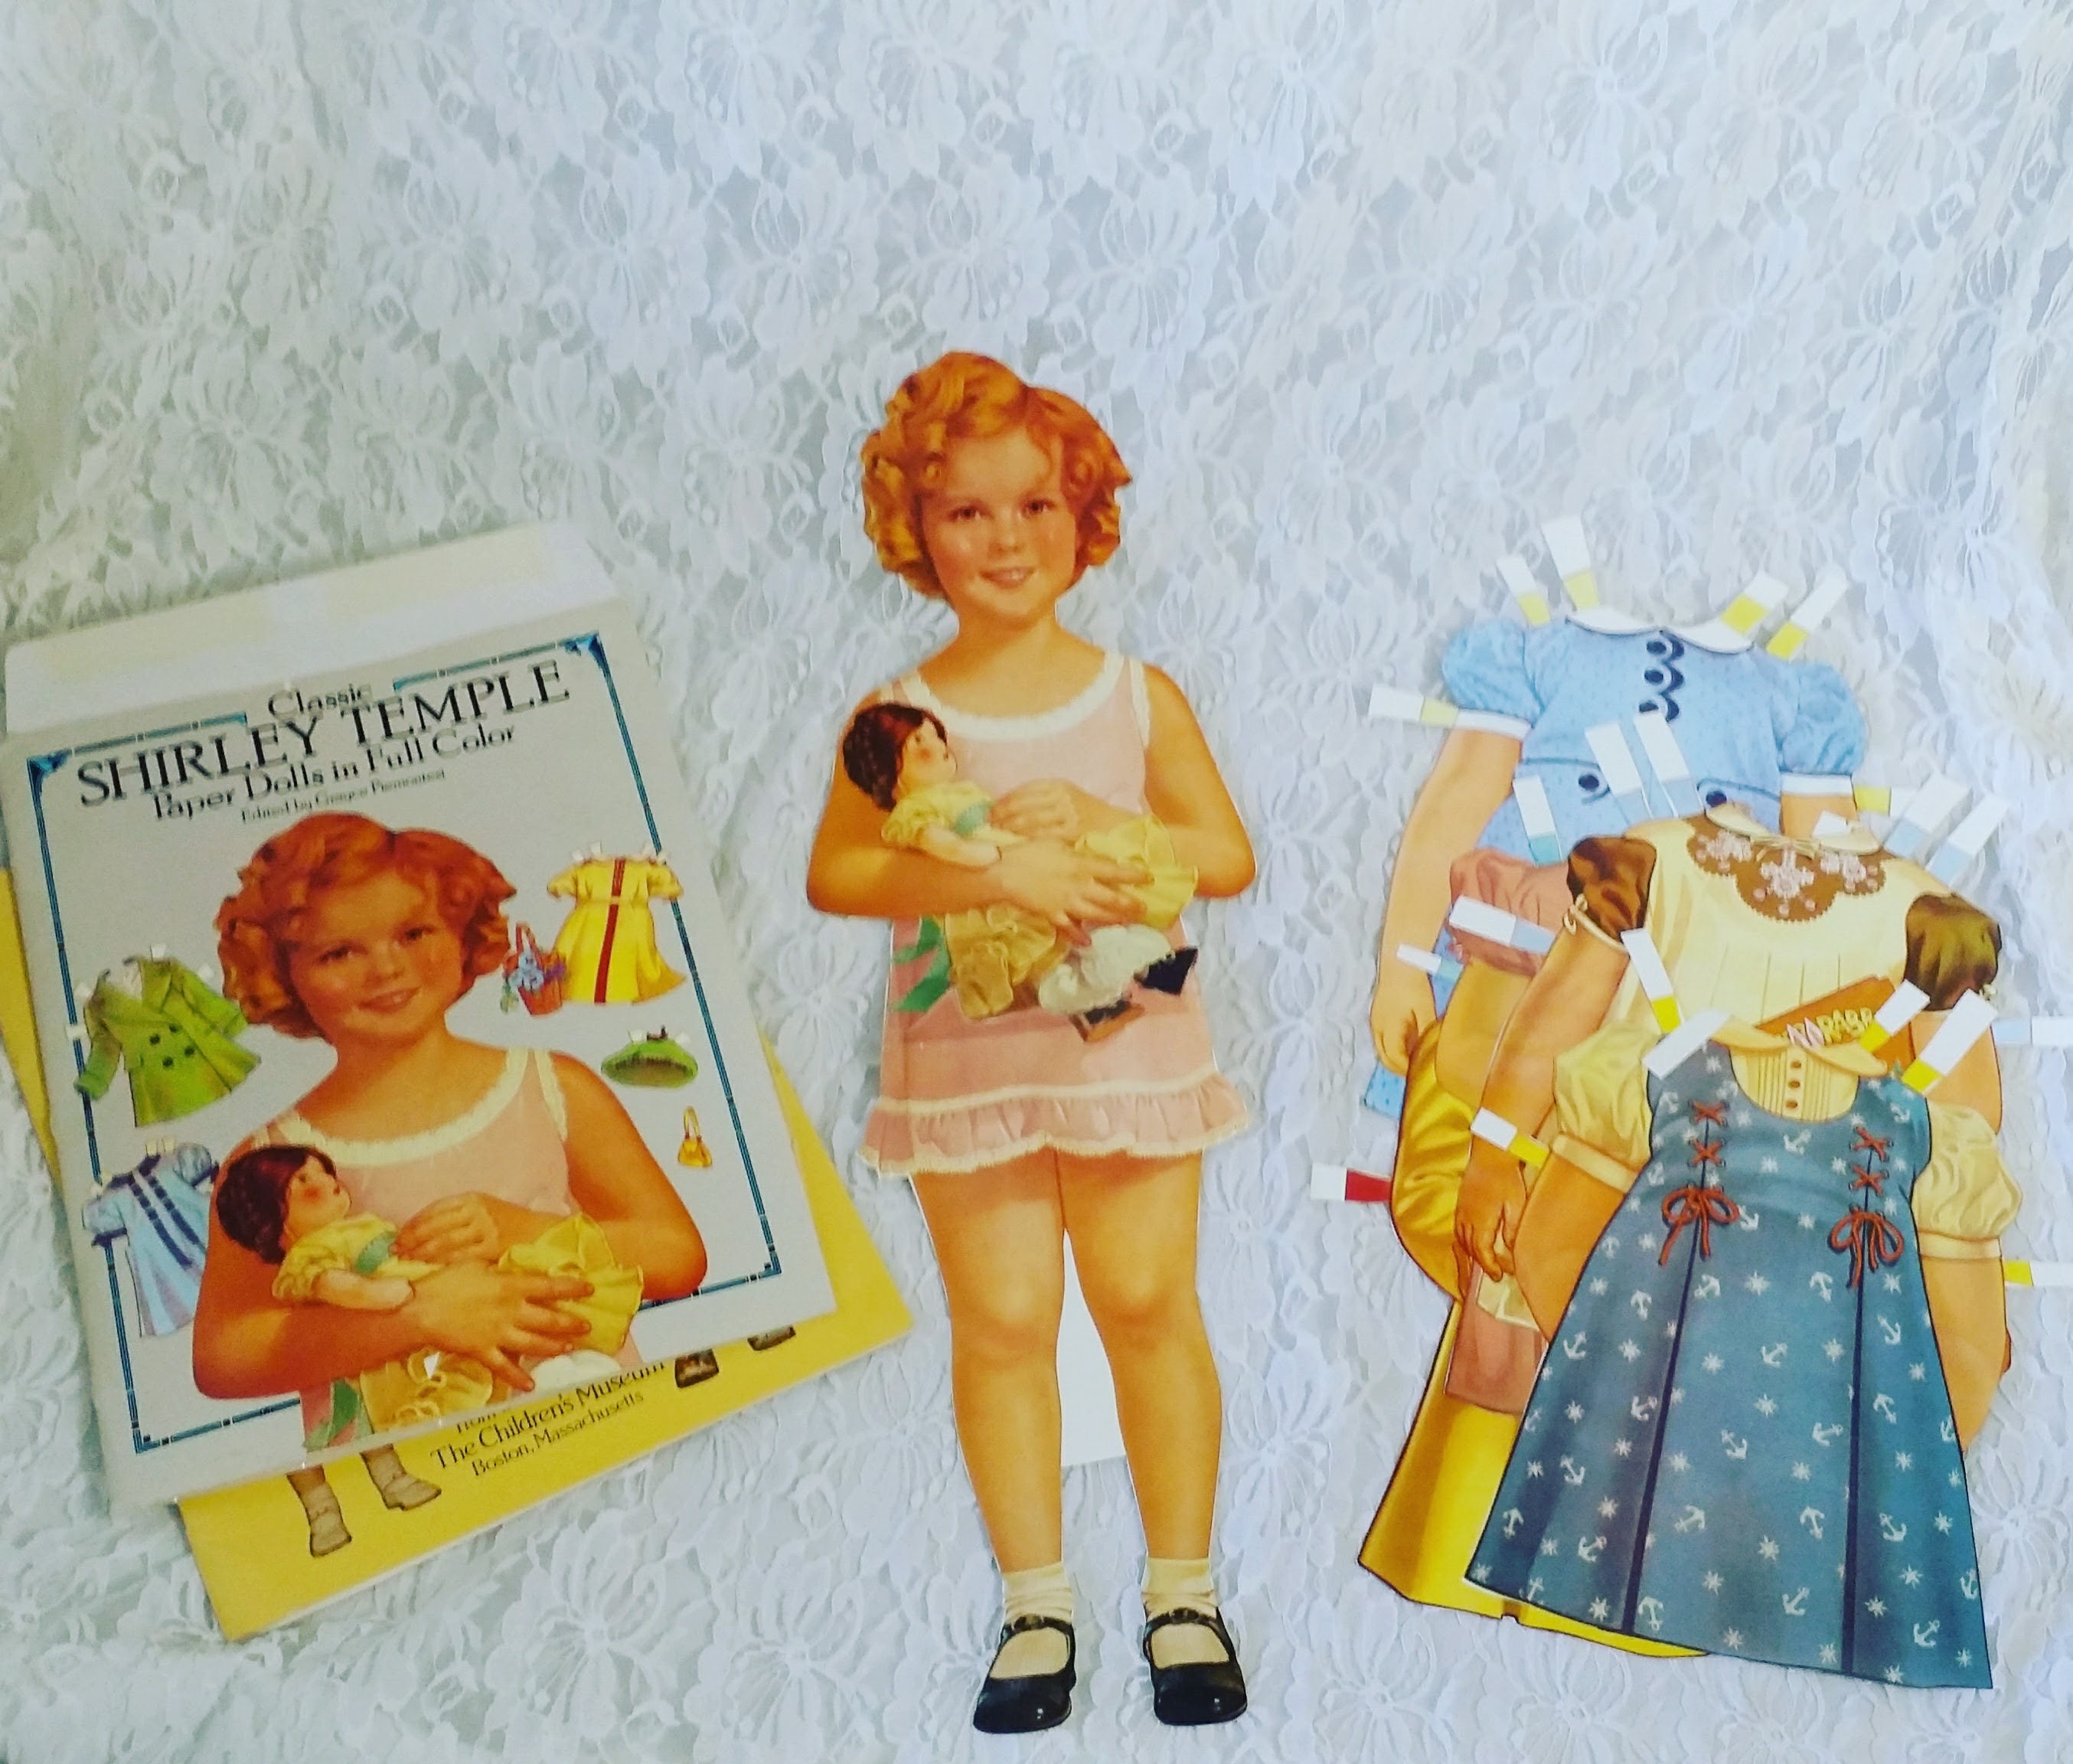 shirley temple paper dolls in full color